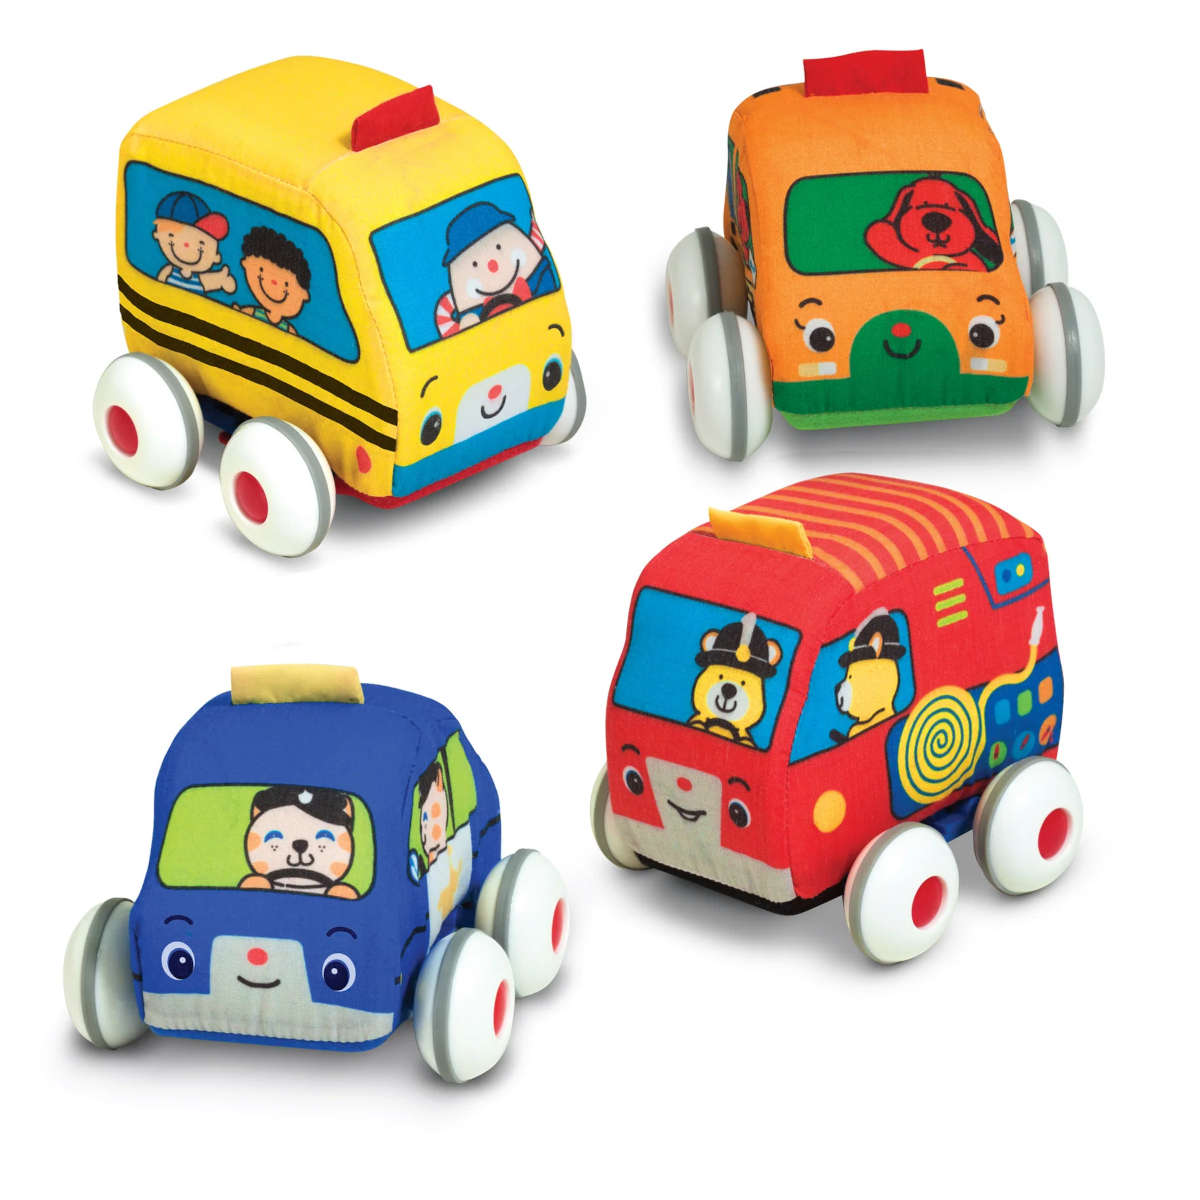 Melissa and Doug Pull Back Town Car